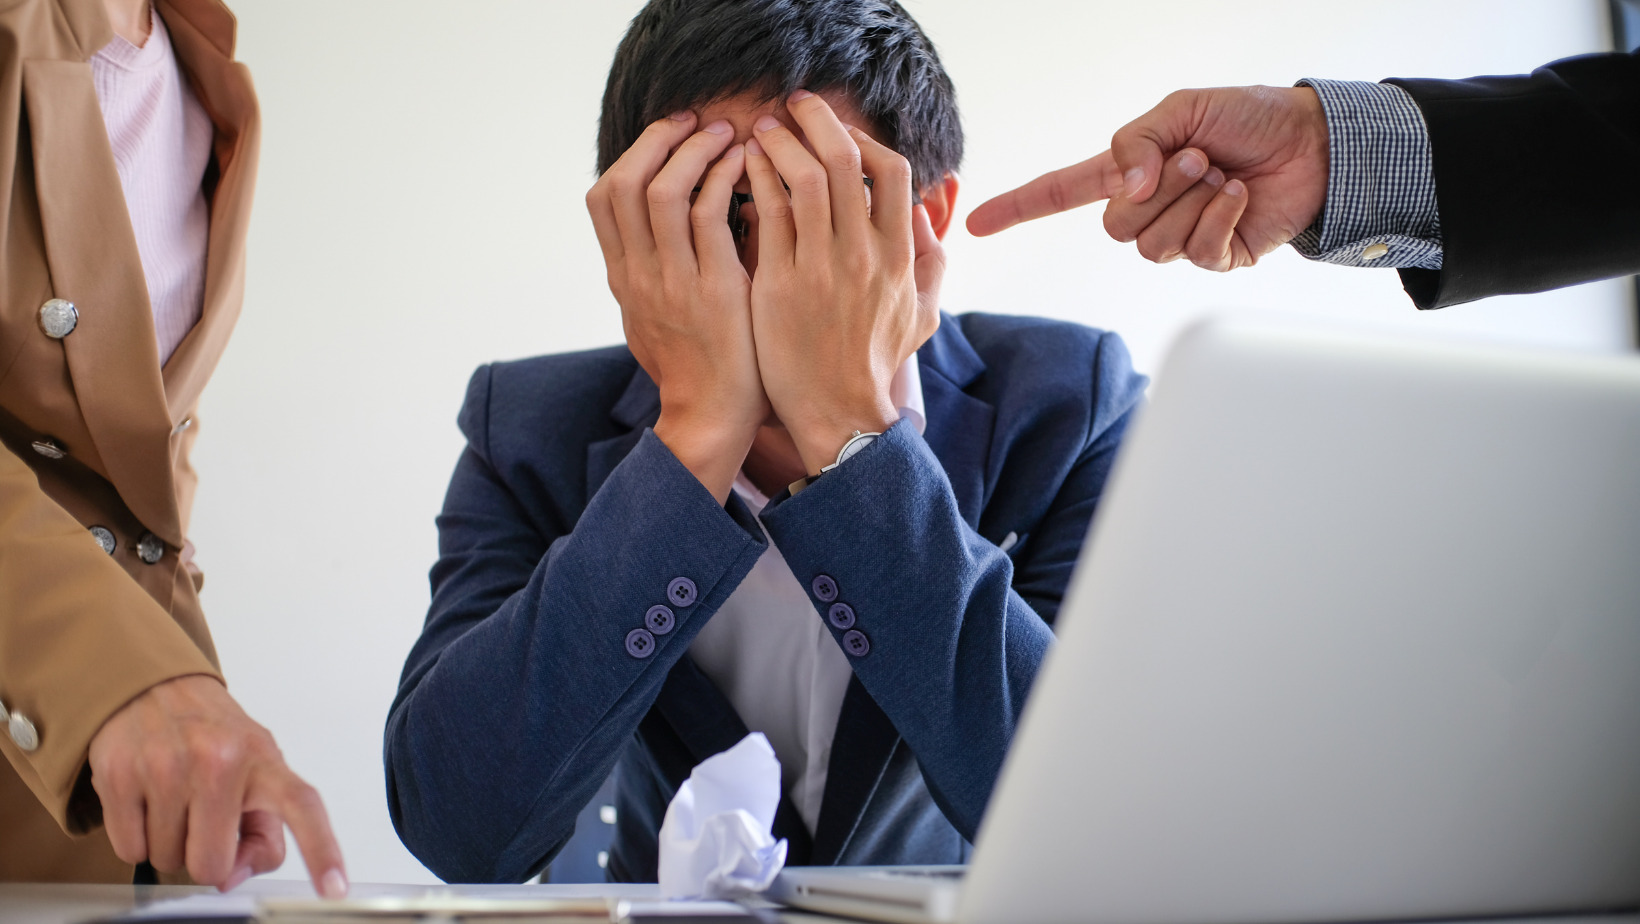 Workplace Bullying & Harassment What's the Difference